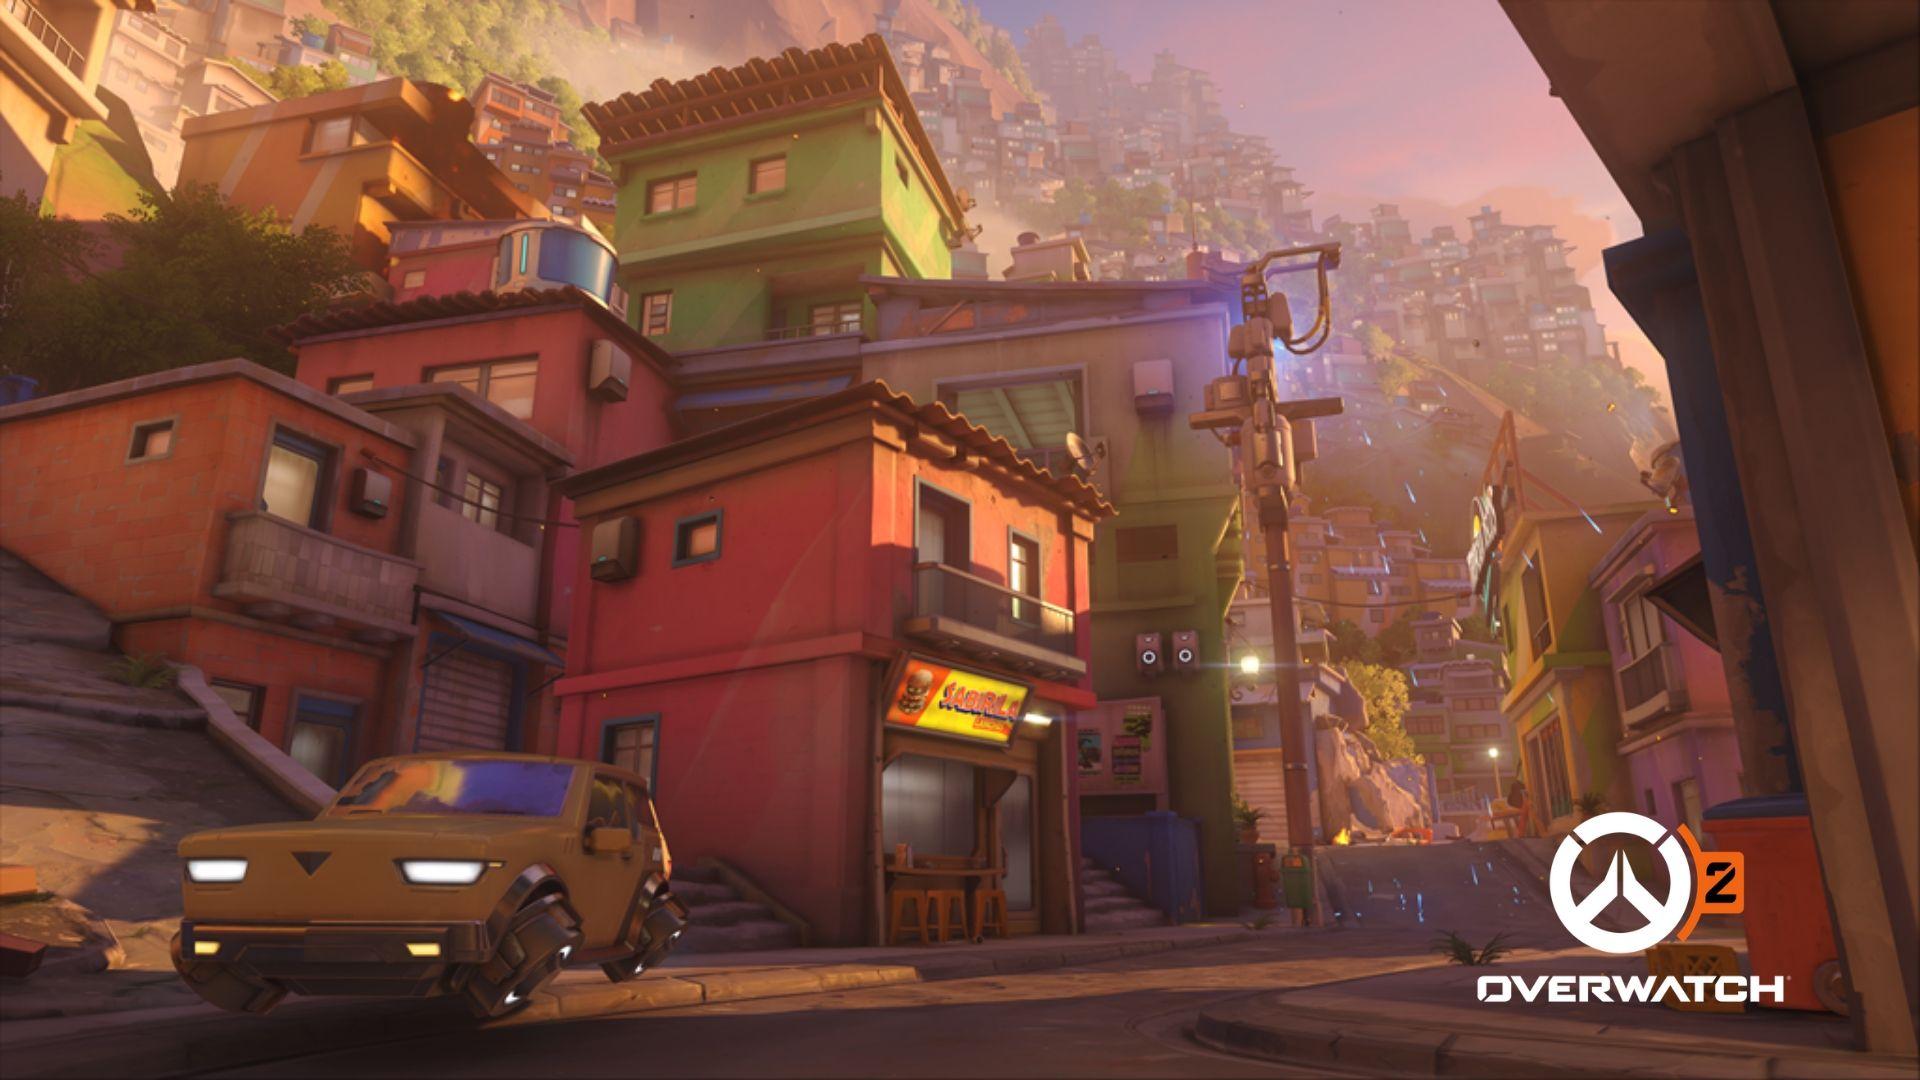 Overwatch 2's Rio de Janeiro map inspired by classic Counter